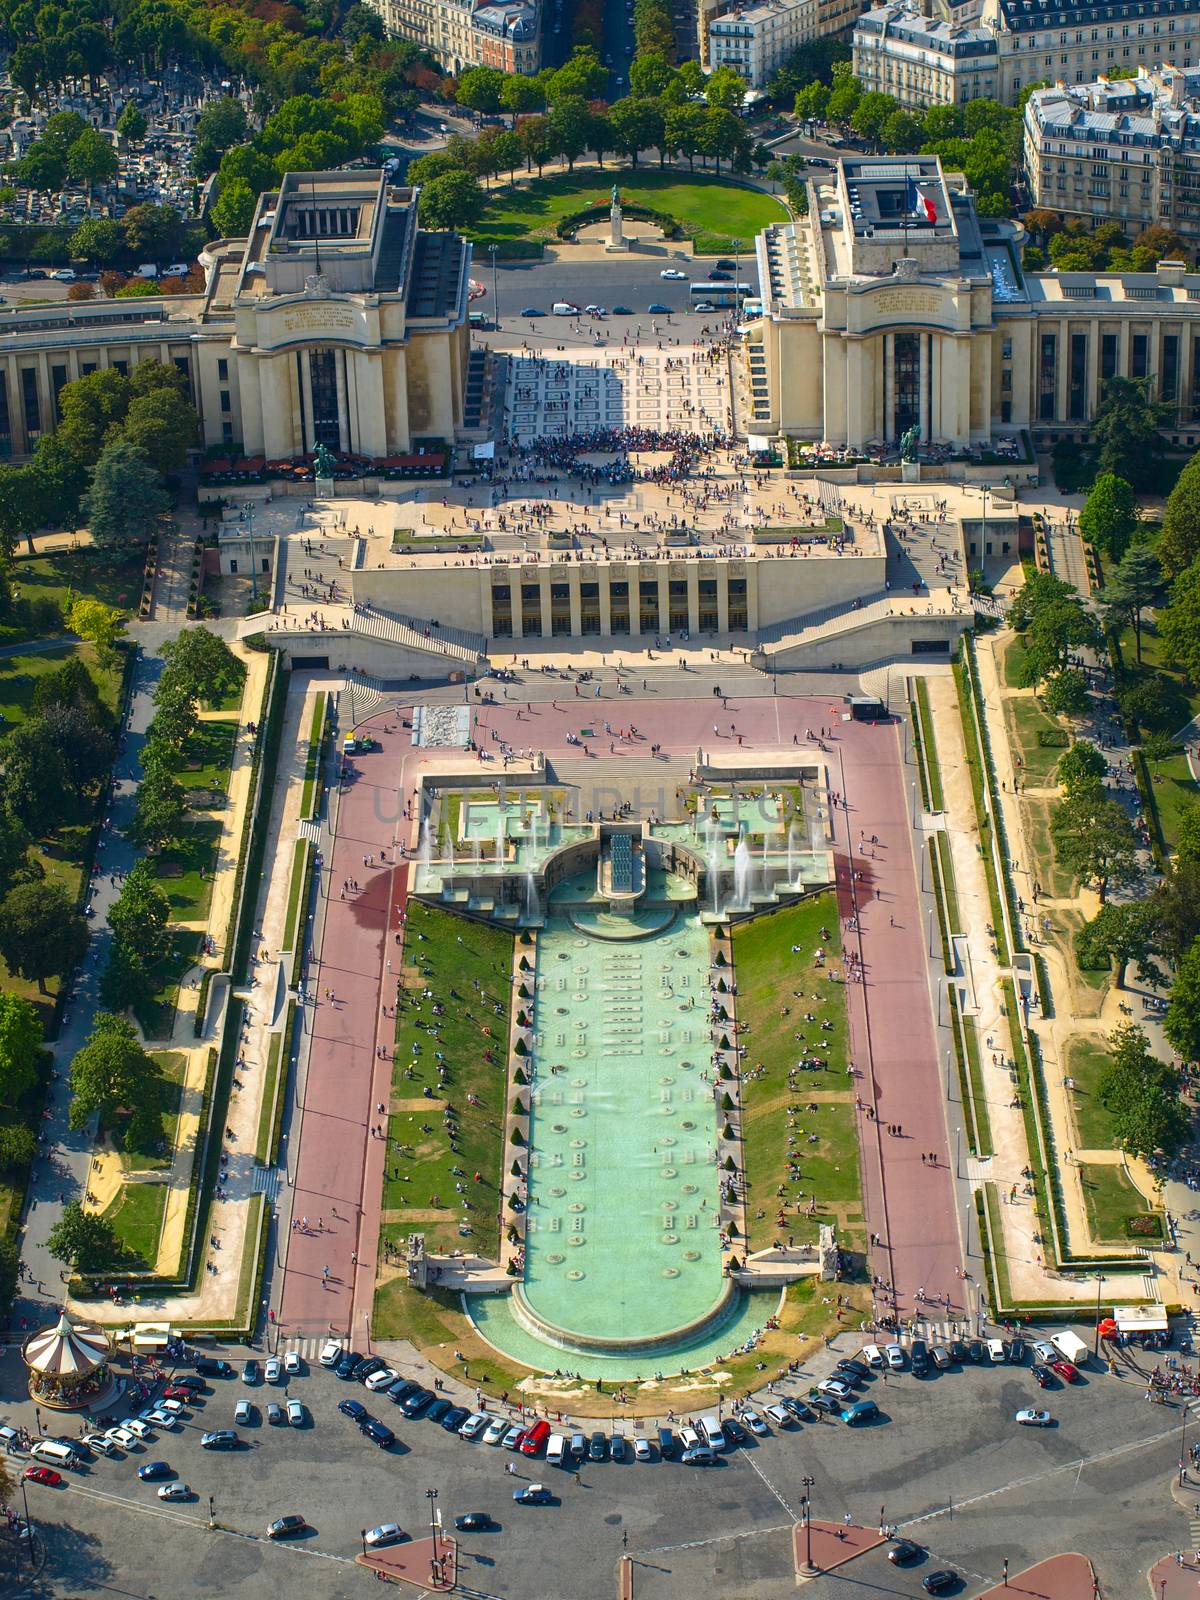 View of Trocadero from Eiffel Tower by pyty